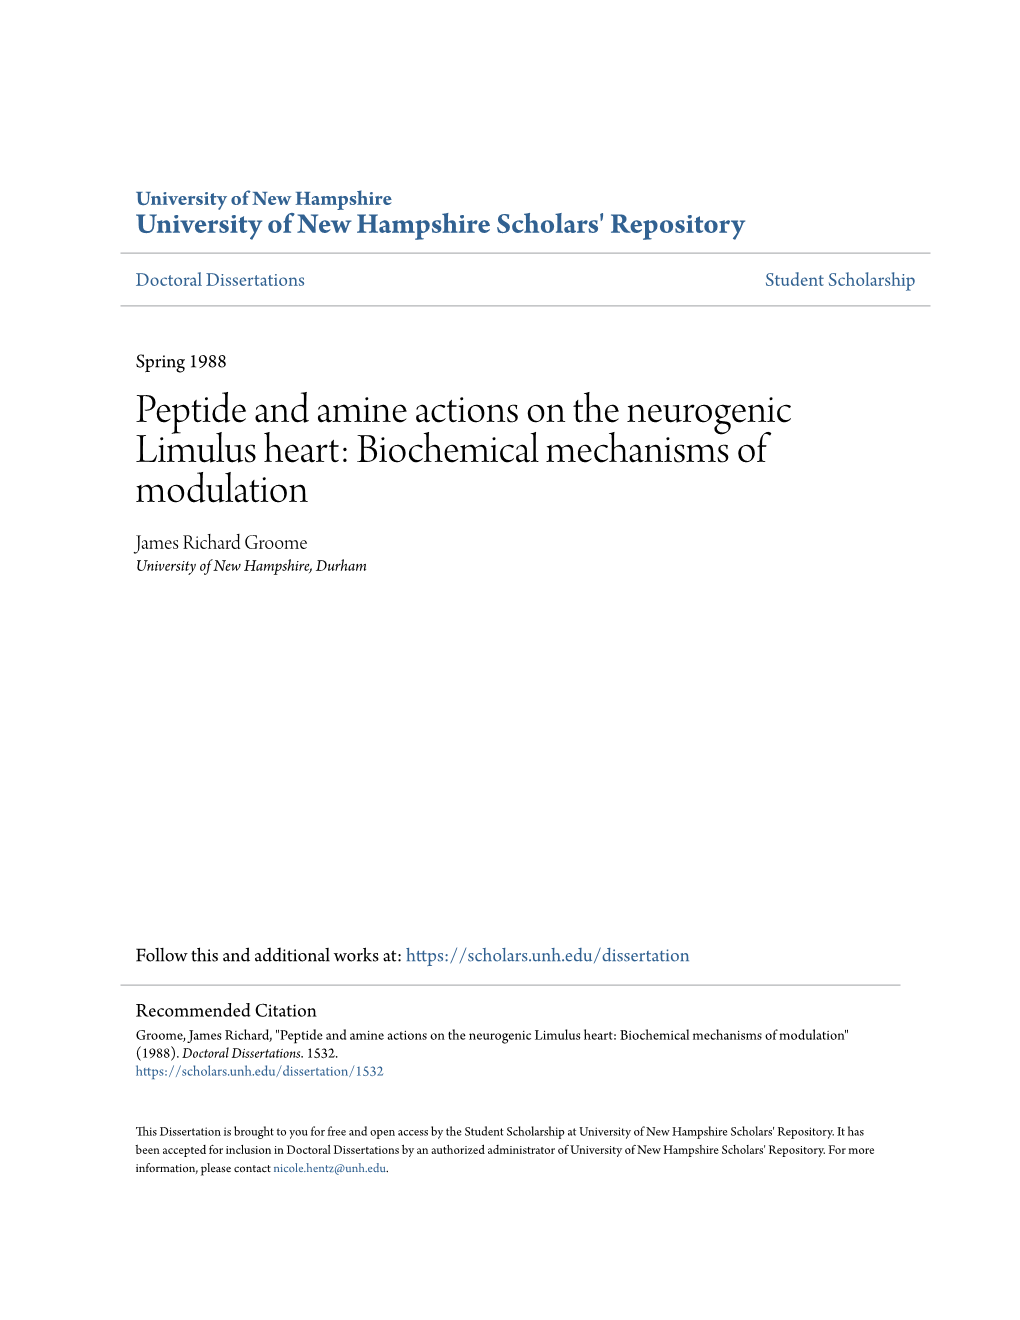 Peptide and Amine Actions on the Neurogenic Limulus Heart: Biochemical Mechanisms of Modulation James Richard Groome University of New Hampshire, Durham